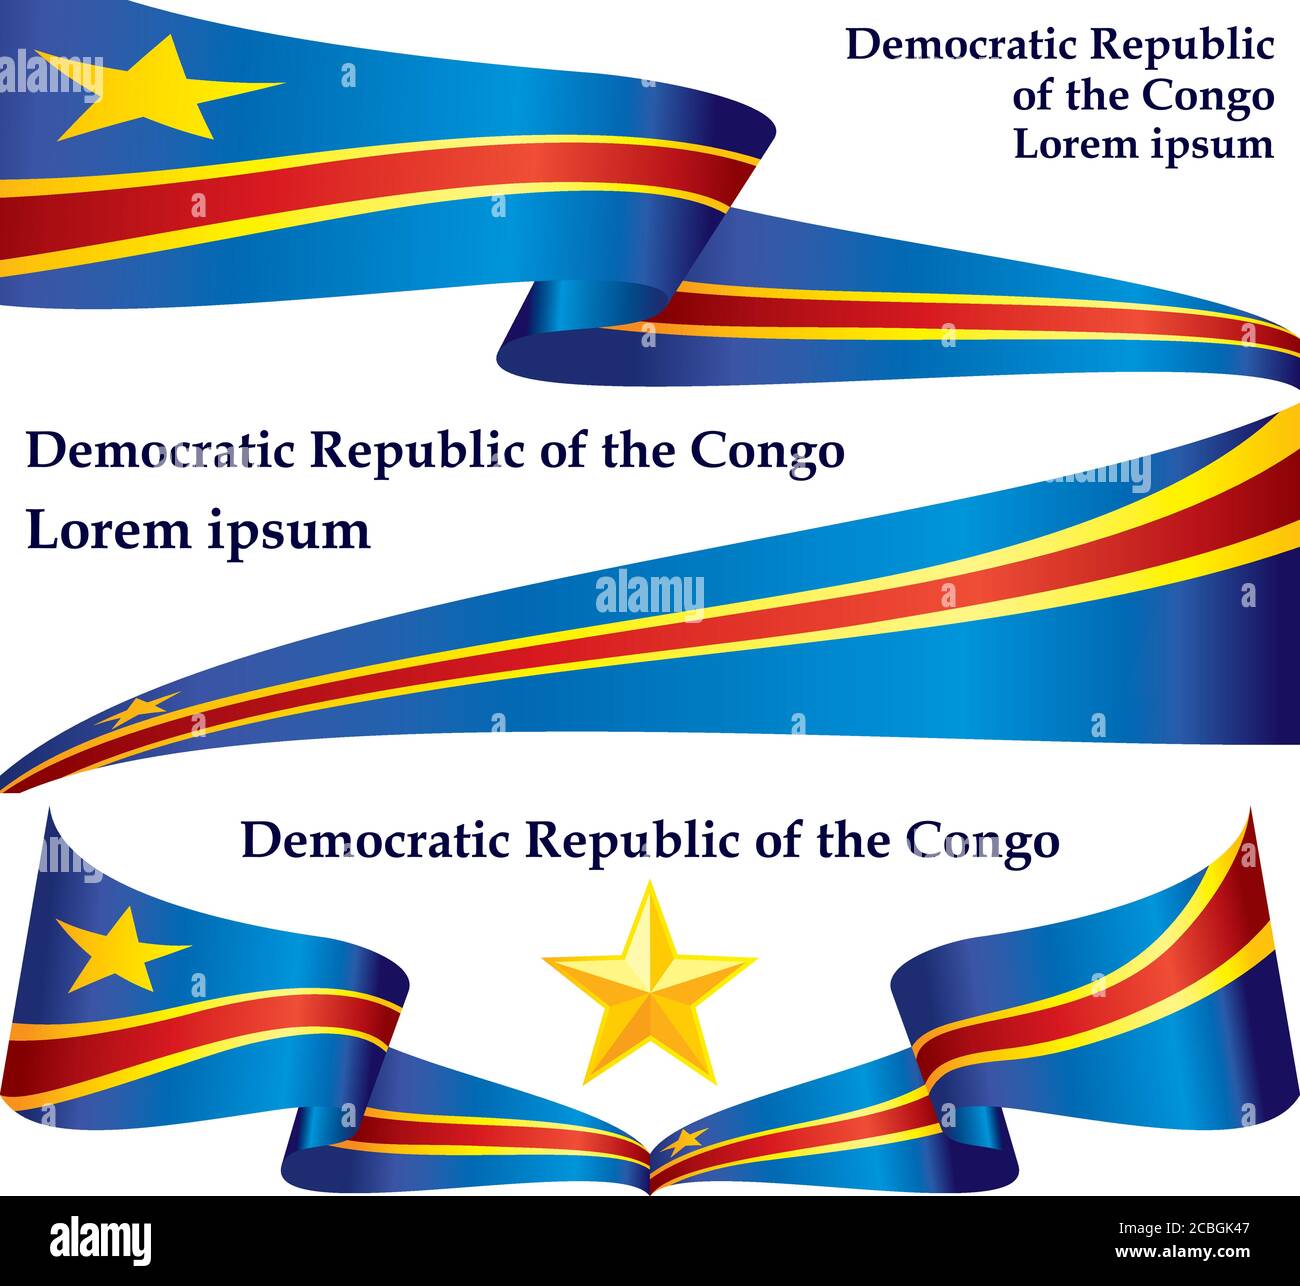 https://c8.alamy.com/comp/2CBGK47/flag-of-the-democratic-republic-of-the-congo-template-for-award-design-an-official-document-with-the-flag-of-the-democratic-republic-of-the-congo-2CBGK47.jpg